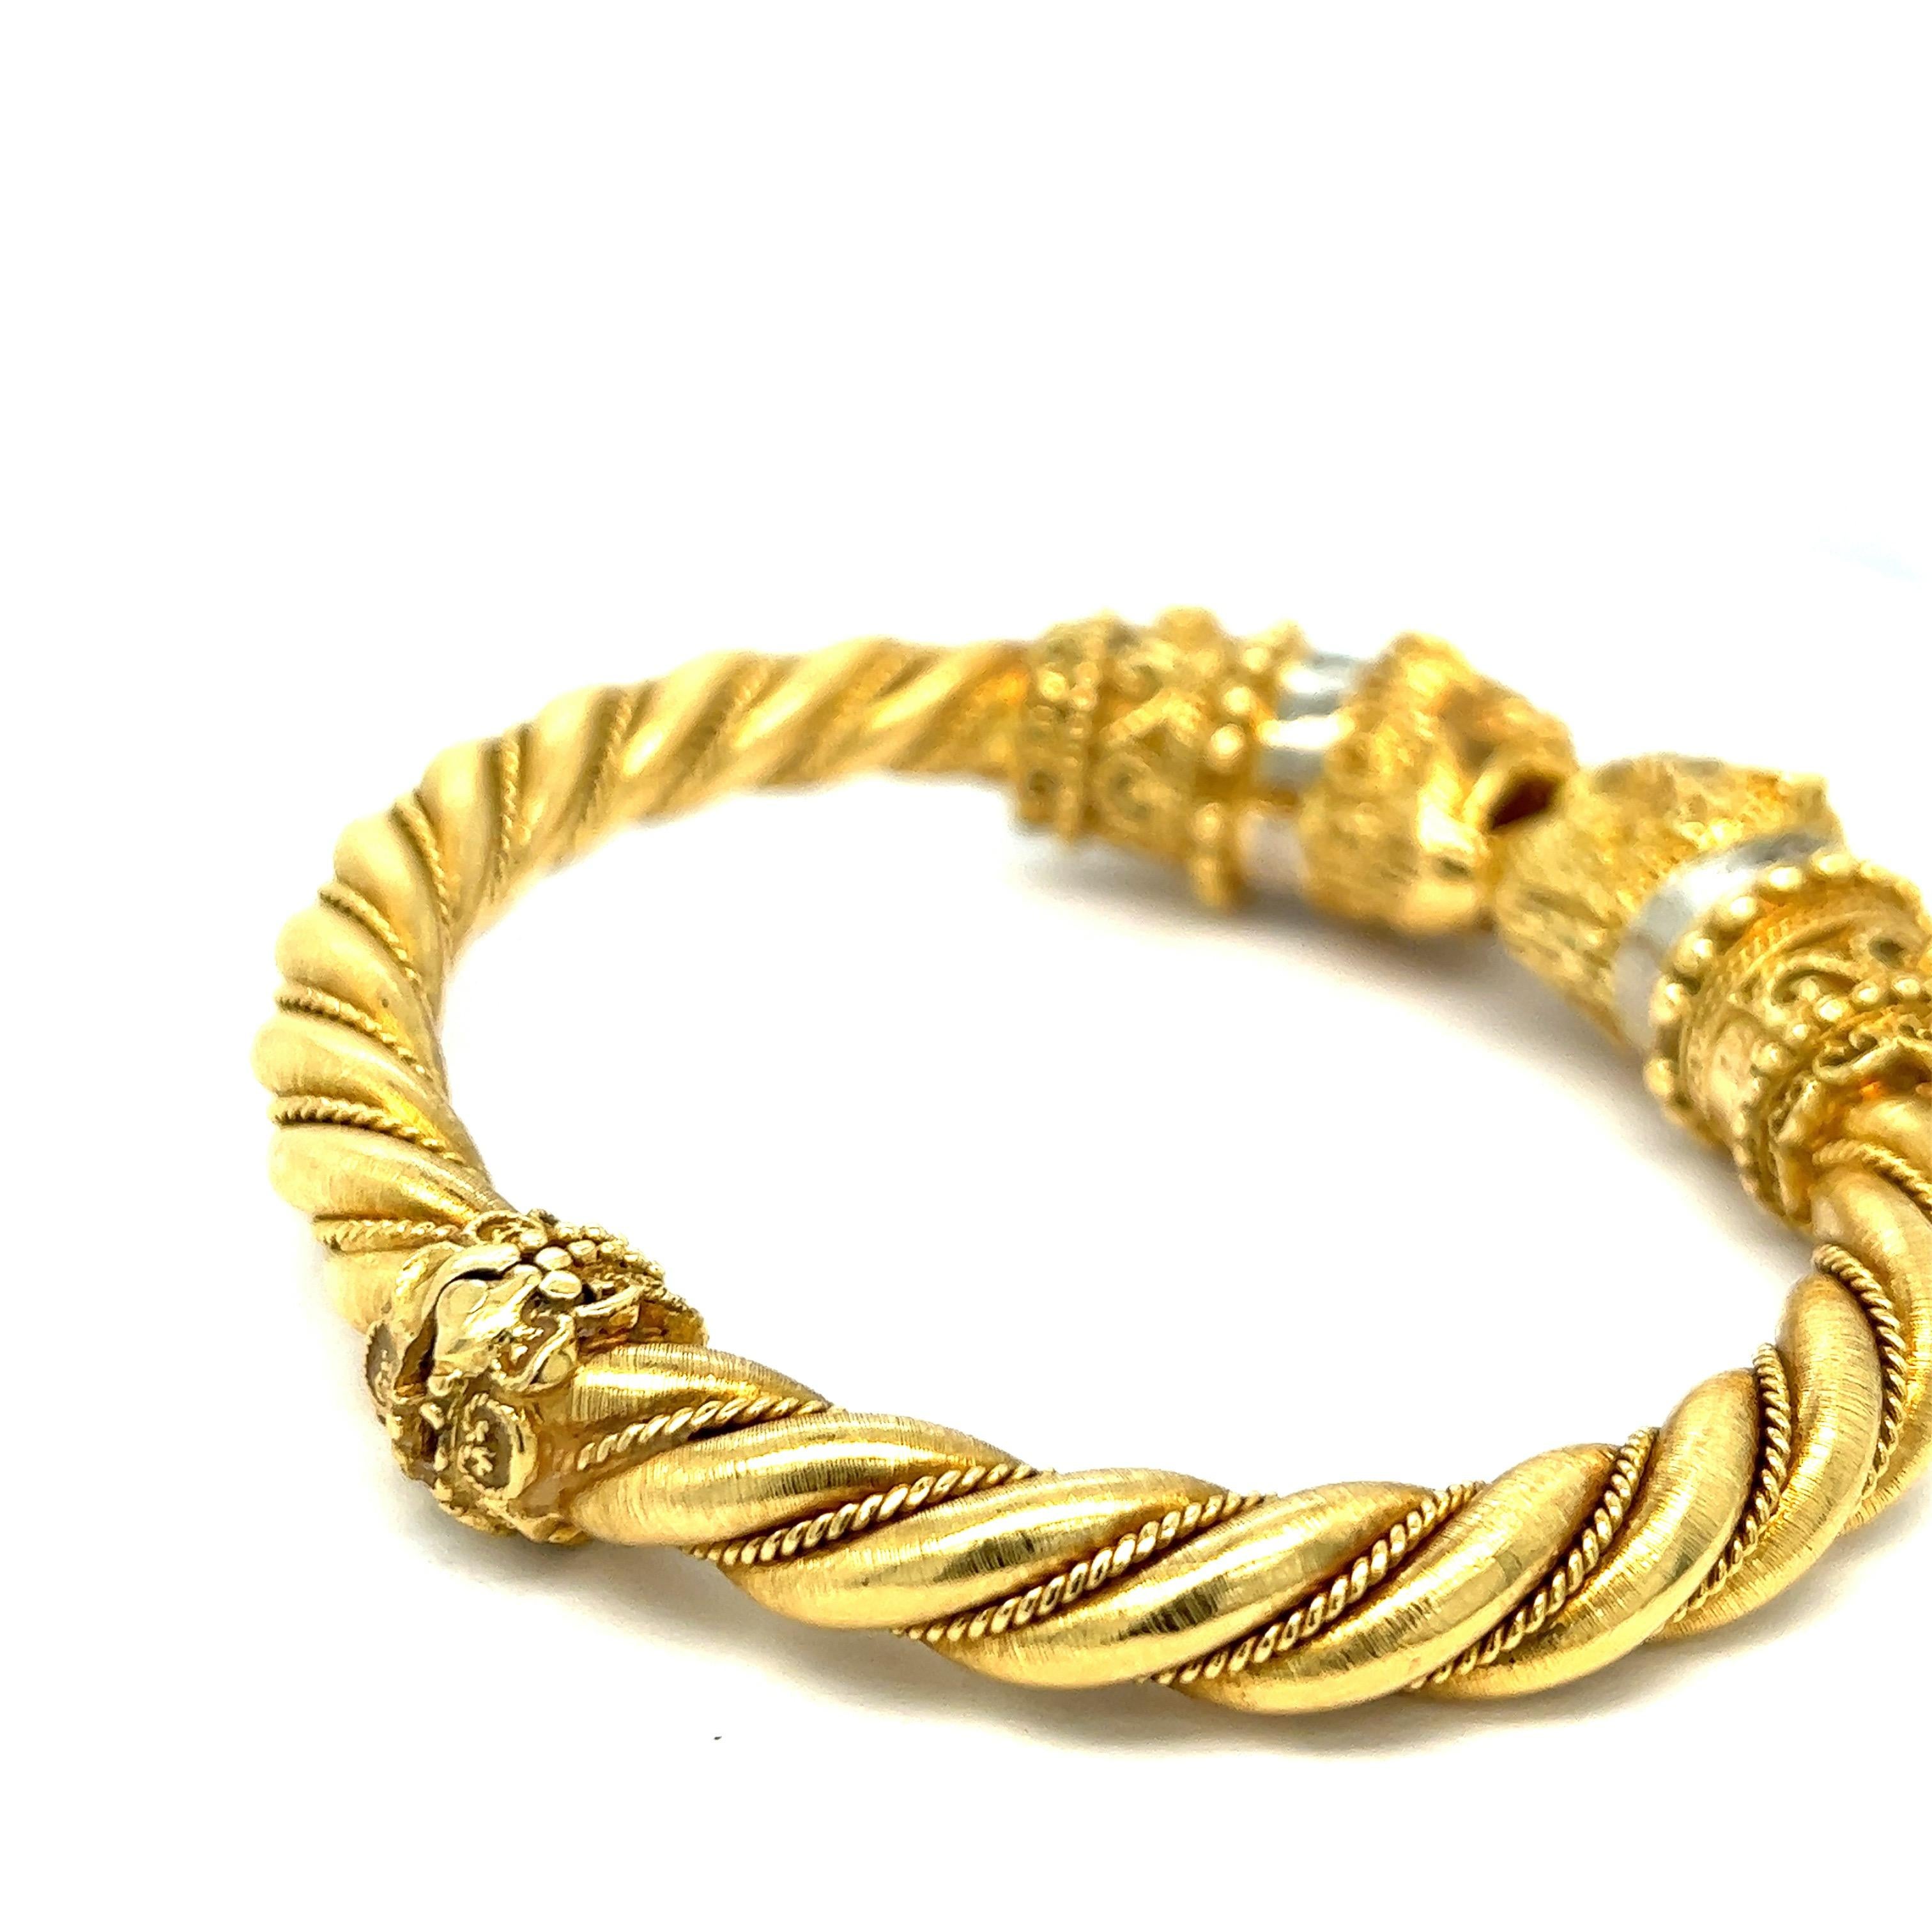 Ilias Lalaounis Chimera Bangle Bracelet In Excellent Condition For Sale In New York, NY